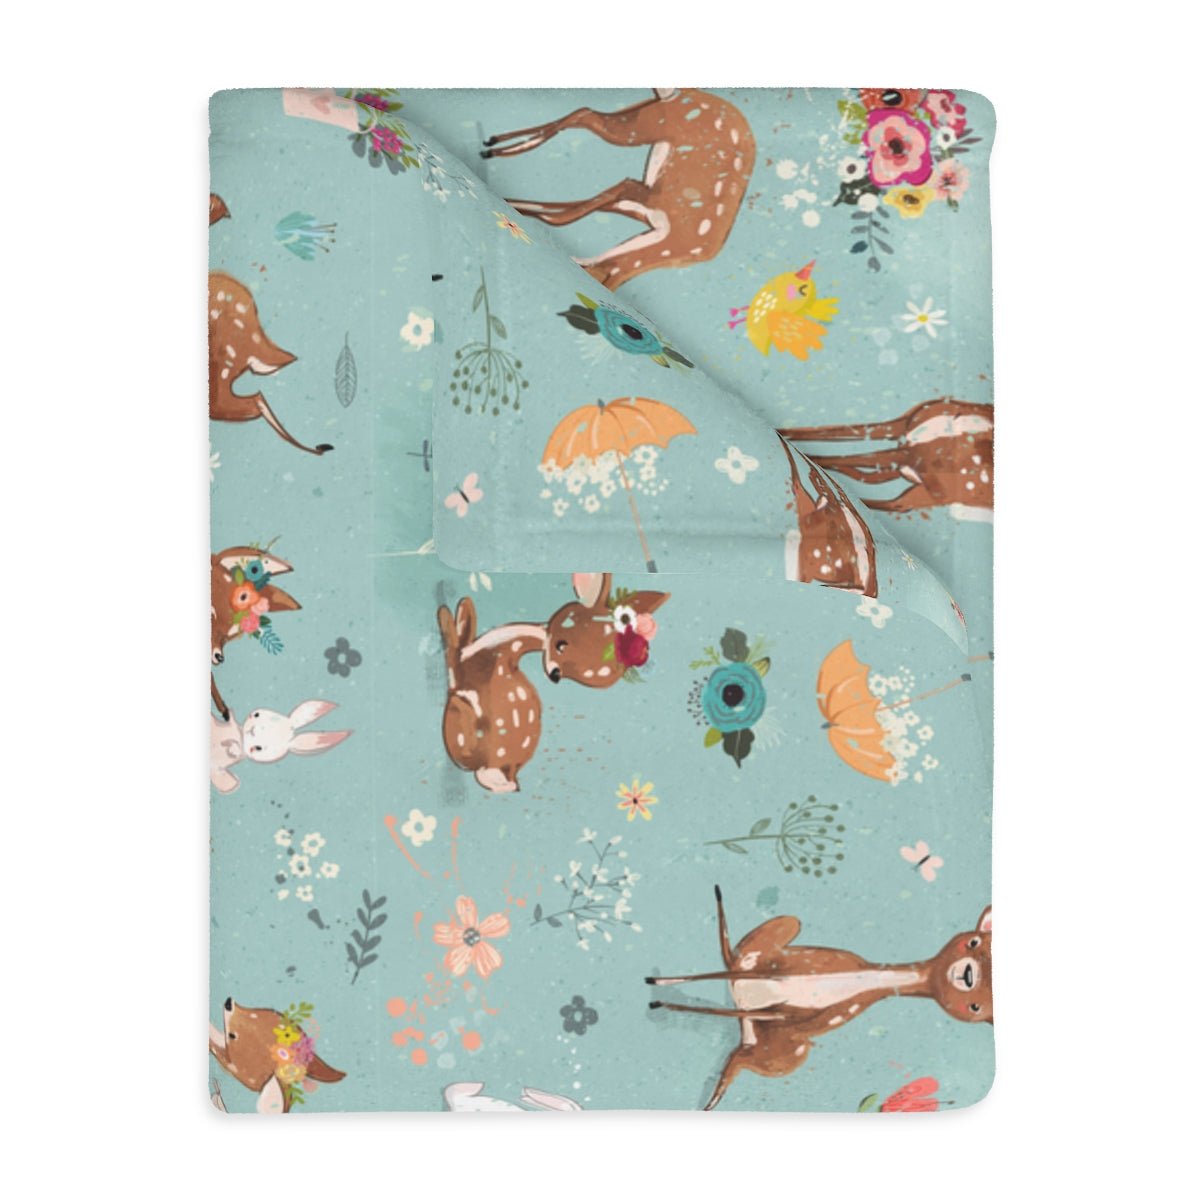 Fawns and Rabbits Velveteen Minky Blanket (Two-sided print) - Puffin Lime